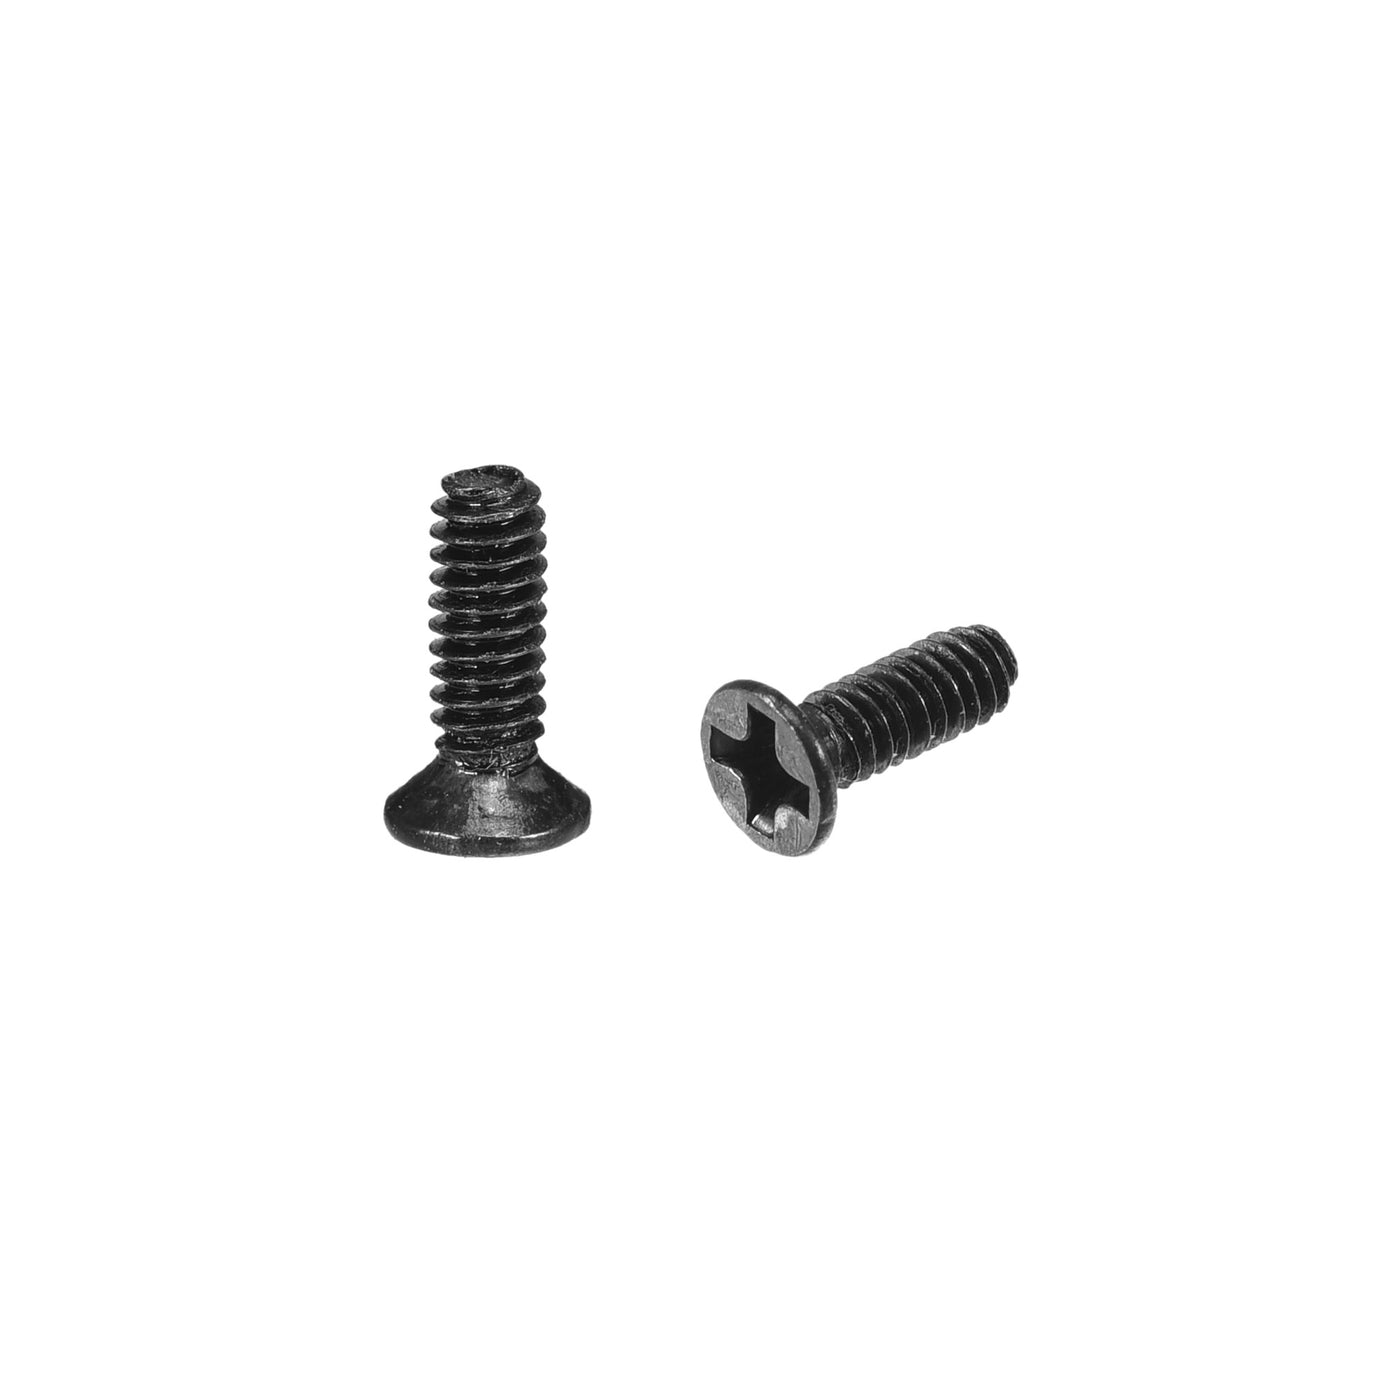 uxcell Uxcell M2 x 6mm Phillips Flat Head Screws Carbon Steel Machine Screws Black for Home Office Computer Case Appliance Equipment 350pcs